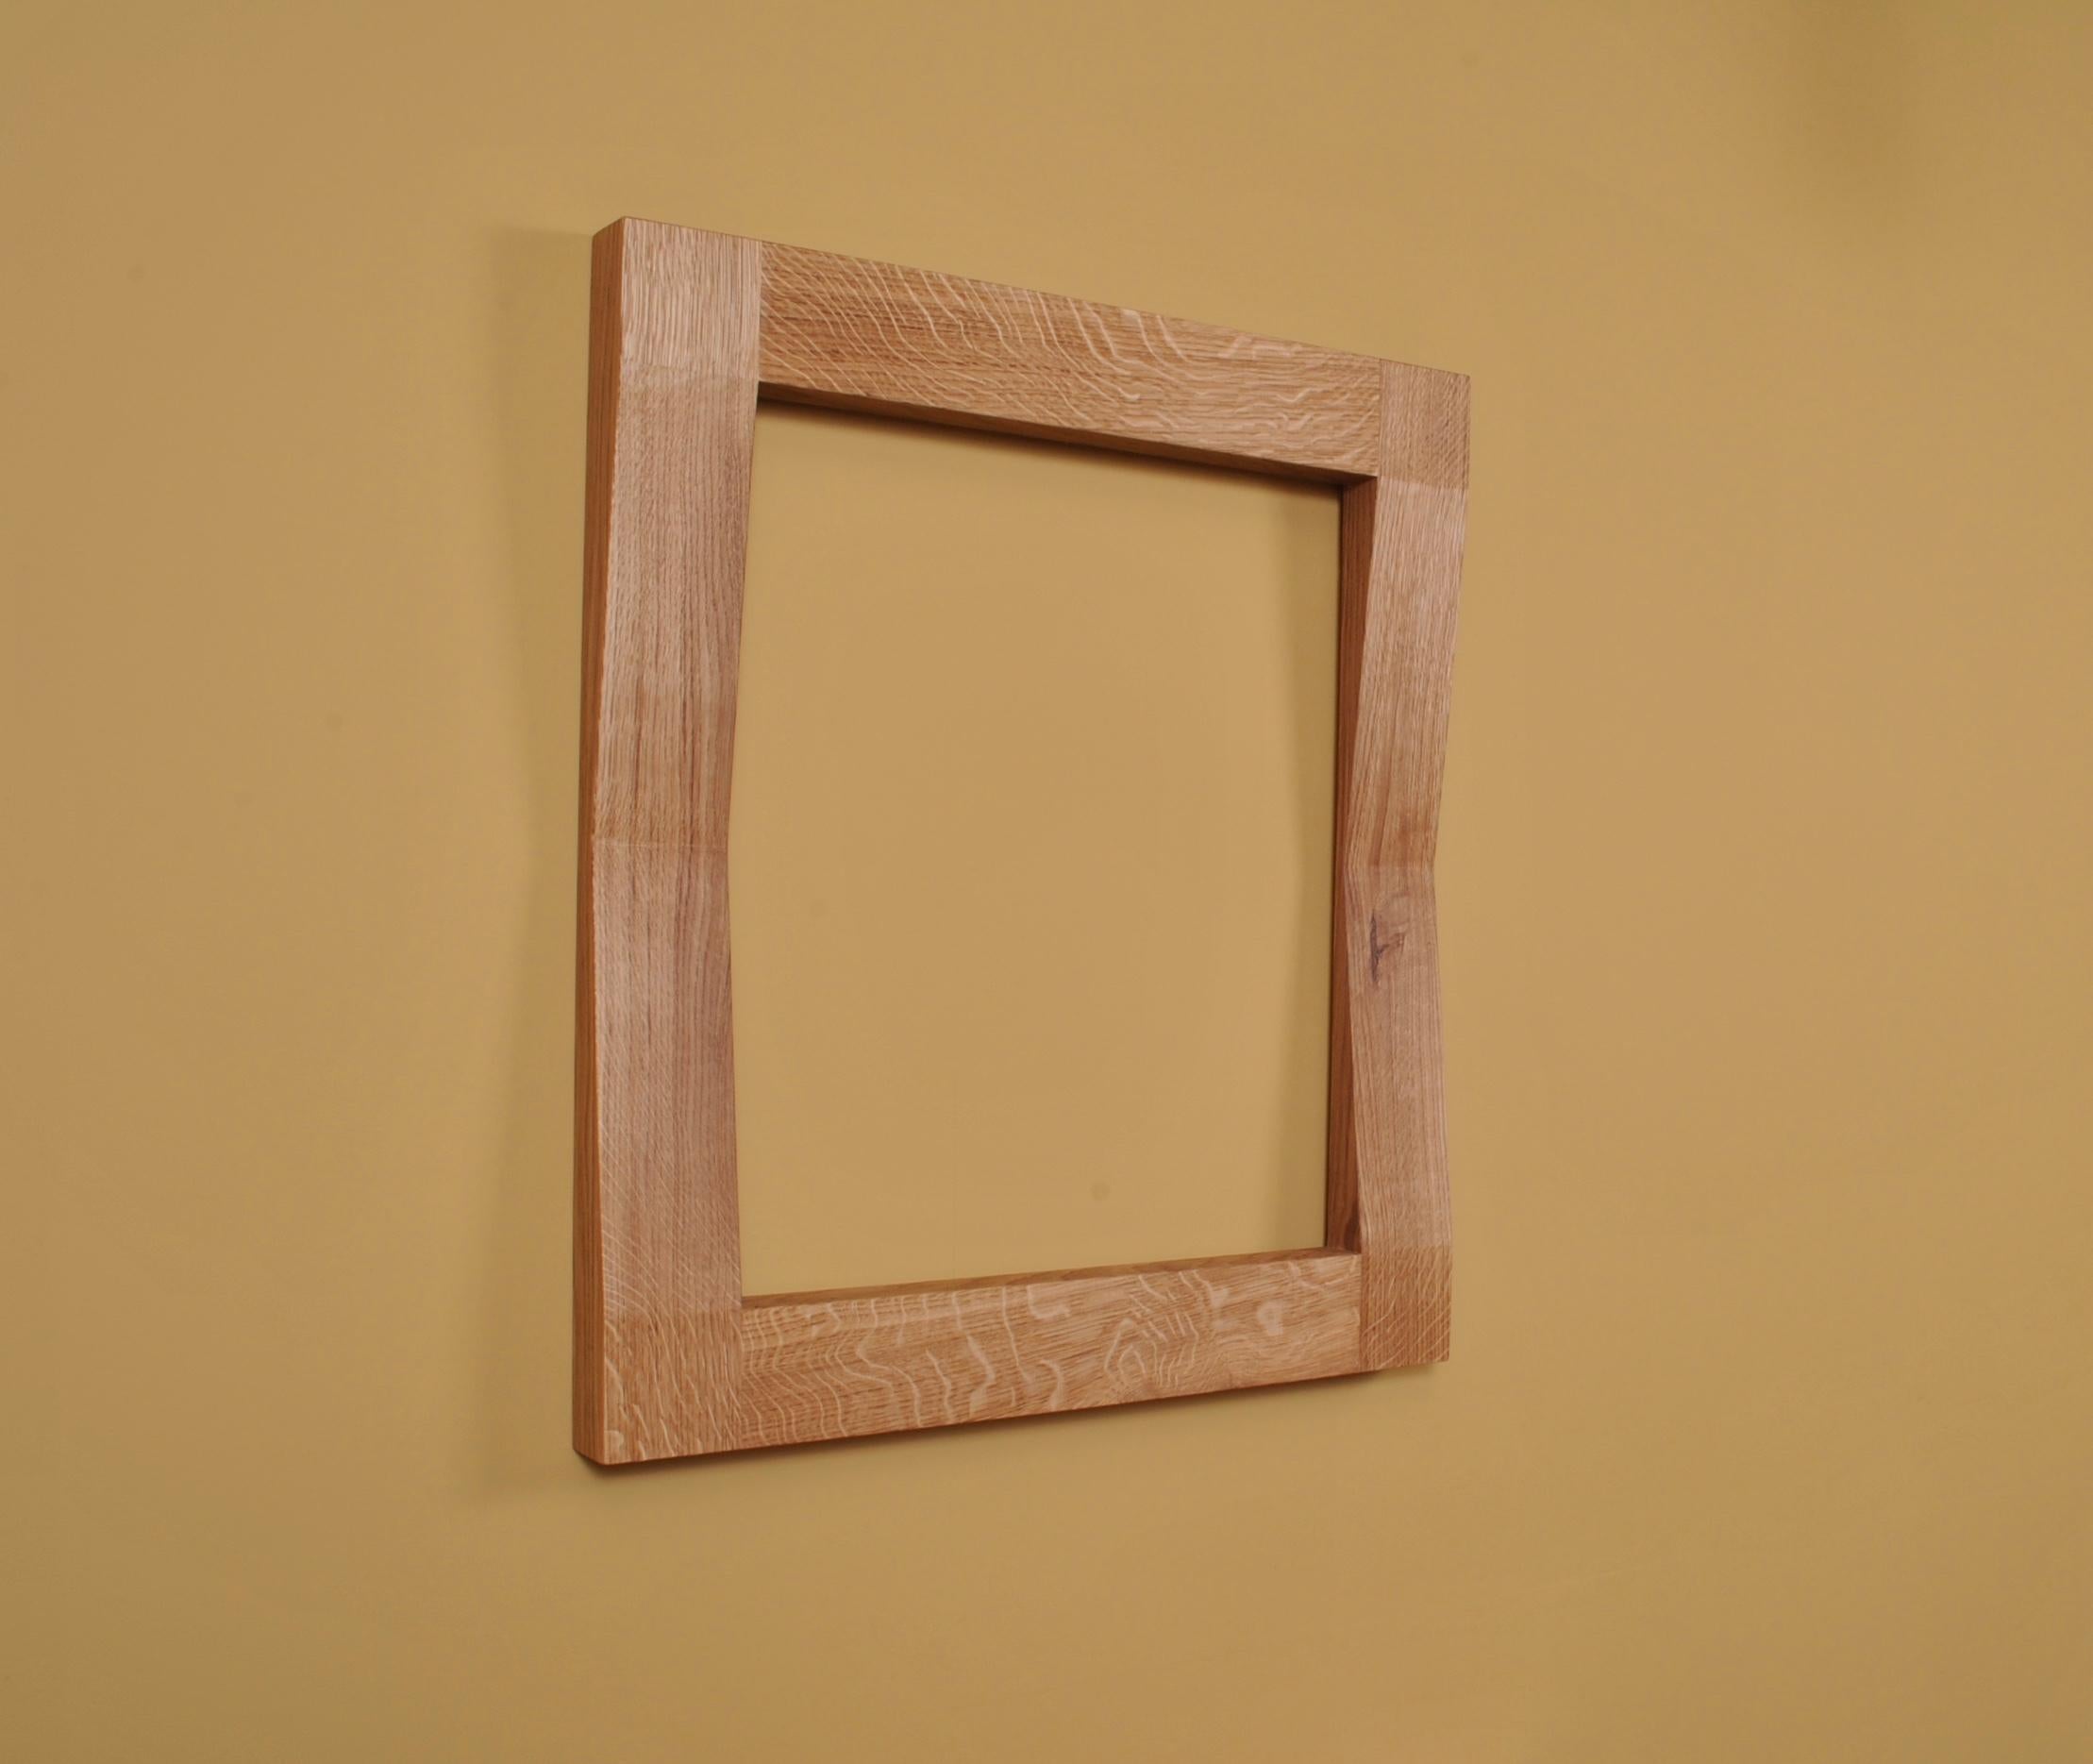 Large handcrafted ‘furrow’ oak framed mirror. Designed by SUM furniture and handcrafted in finest fully quartersawn English oak. Hand finished in natural oils. The furrow mirror creates a striking presence and gives the illusion of it having once